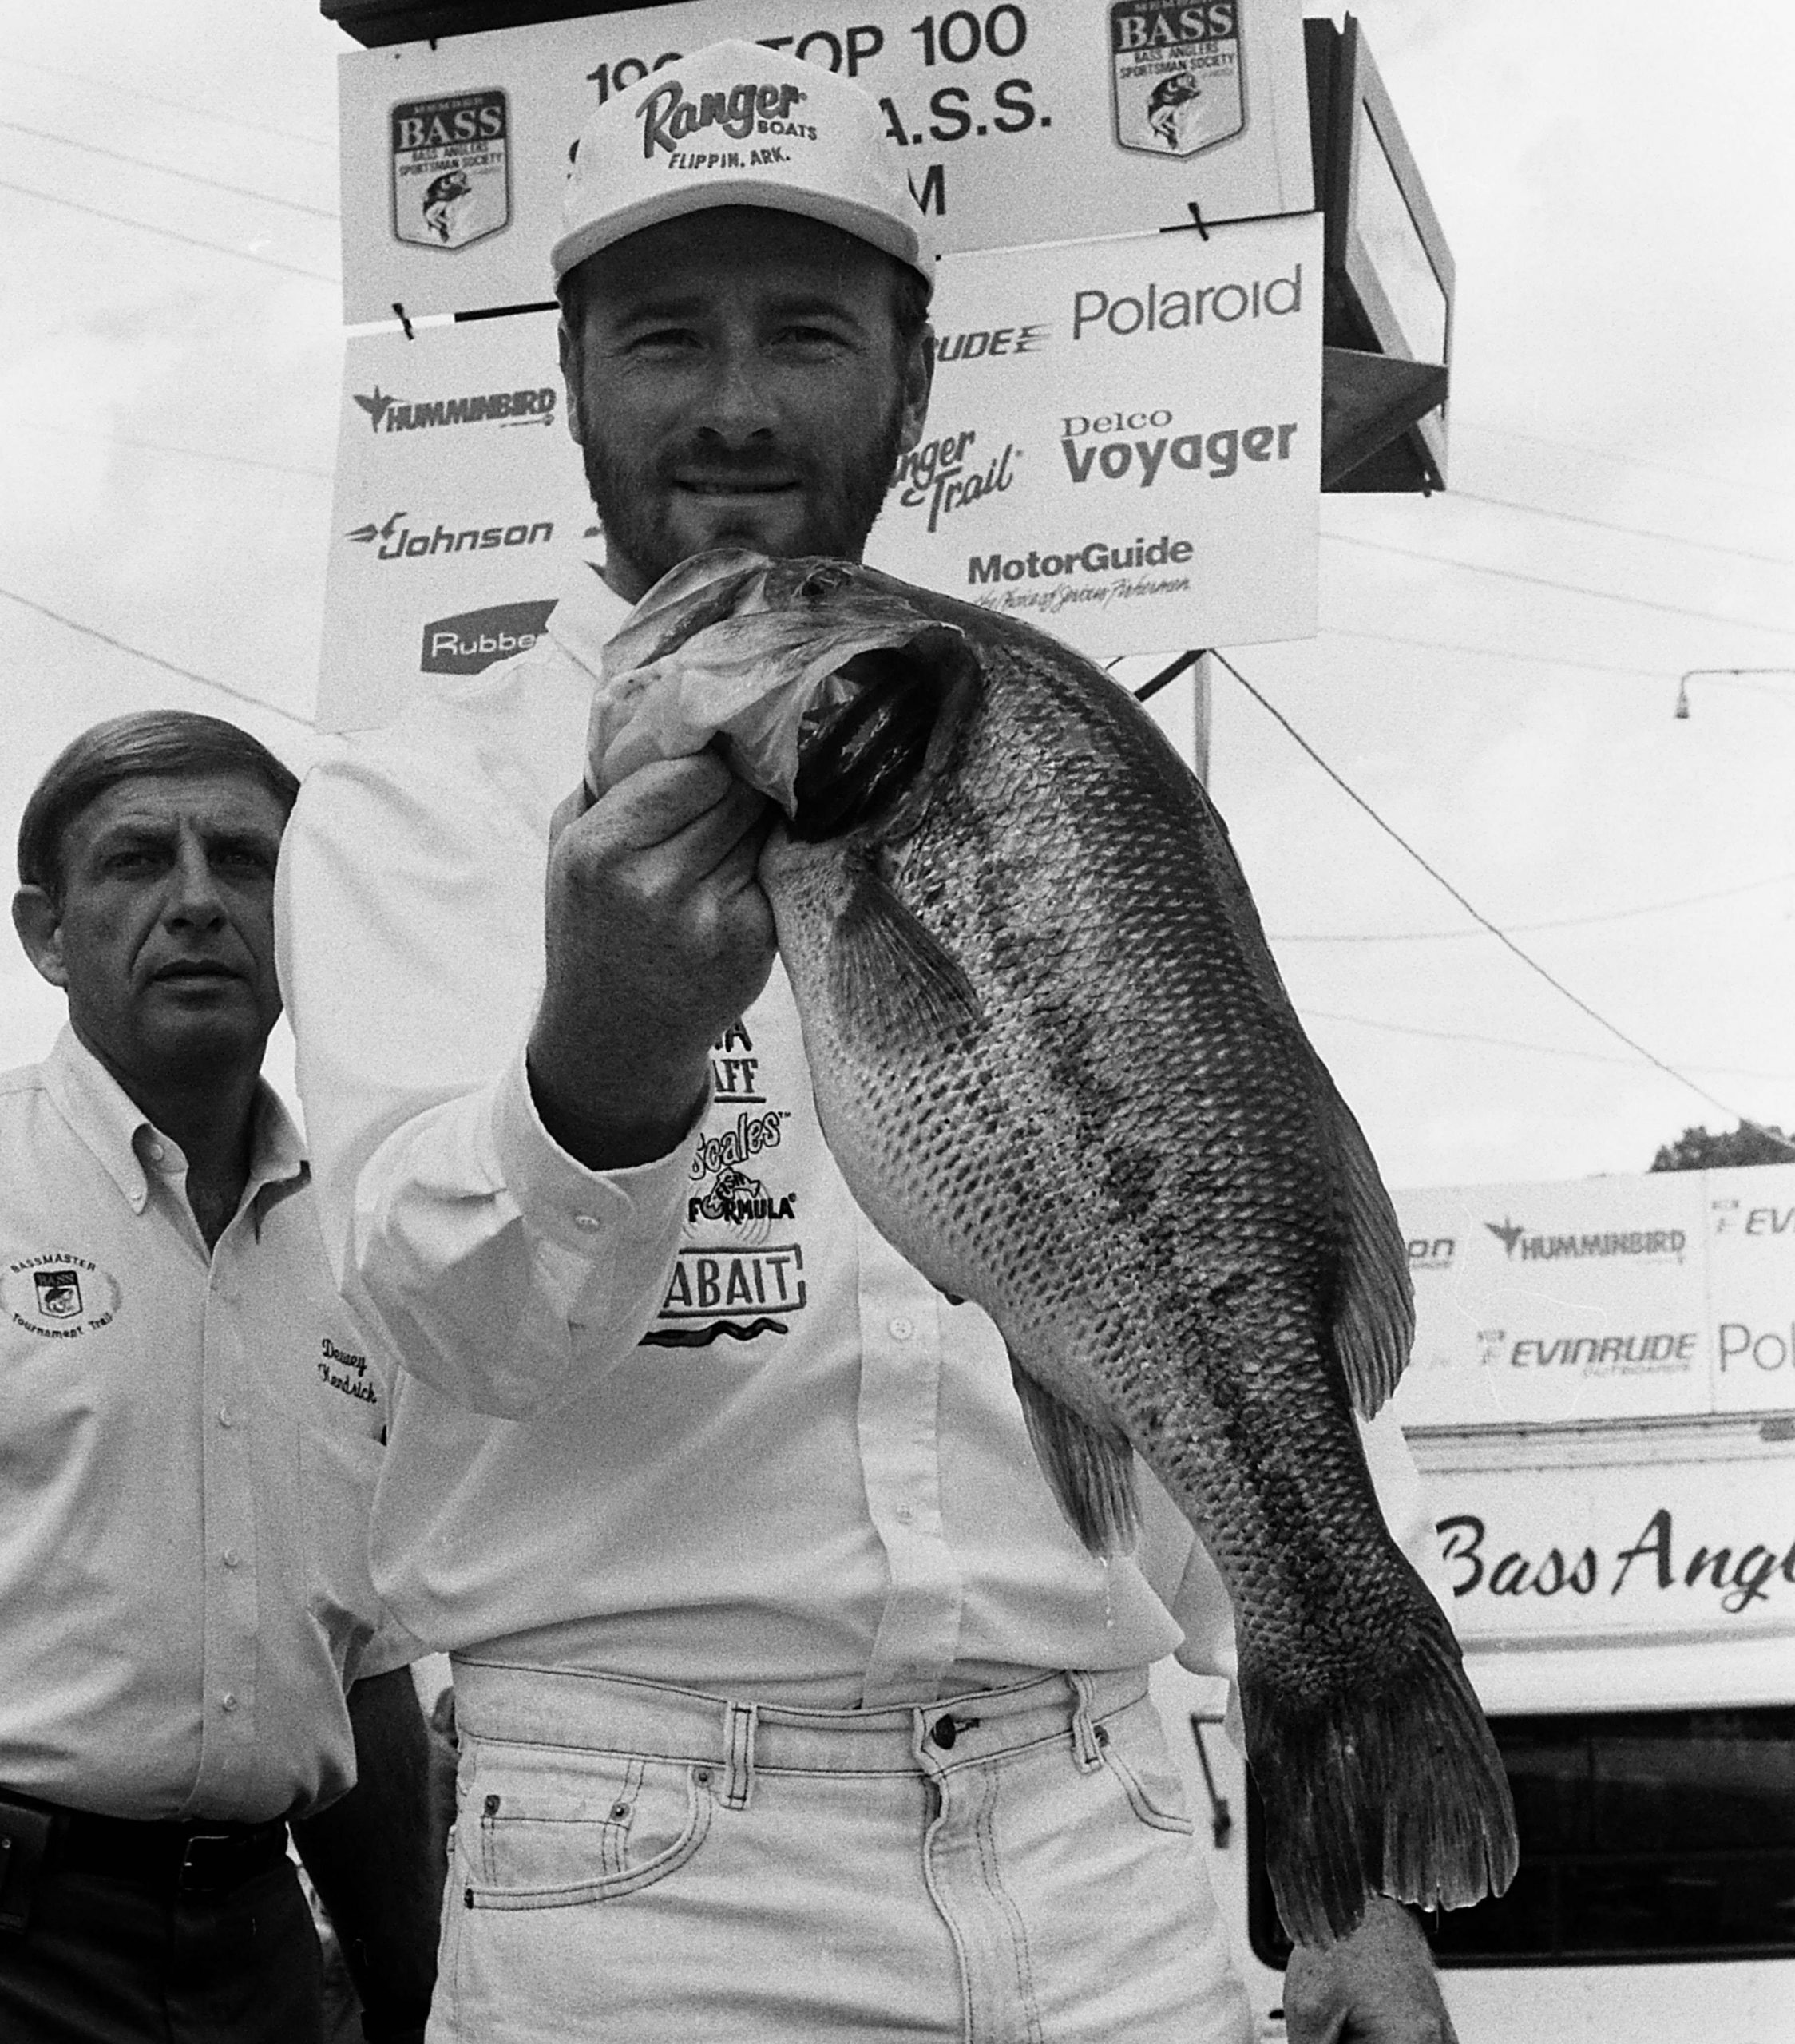 Claude Fishburne, whom everyone knows as Fish Fishburne, a longtime B.A.S.S. tournament emcee, caught the tournamentâs biggest bass, an 8-11. The average bass at the 1990 event weighed 1-7.